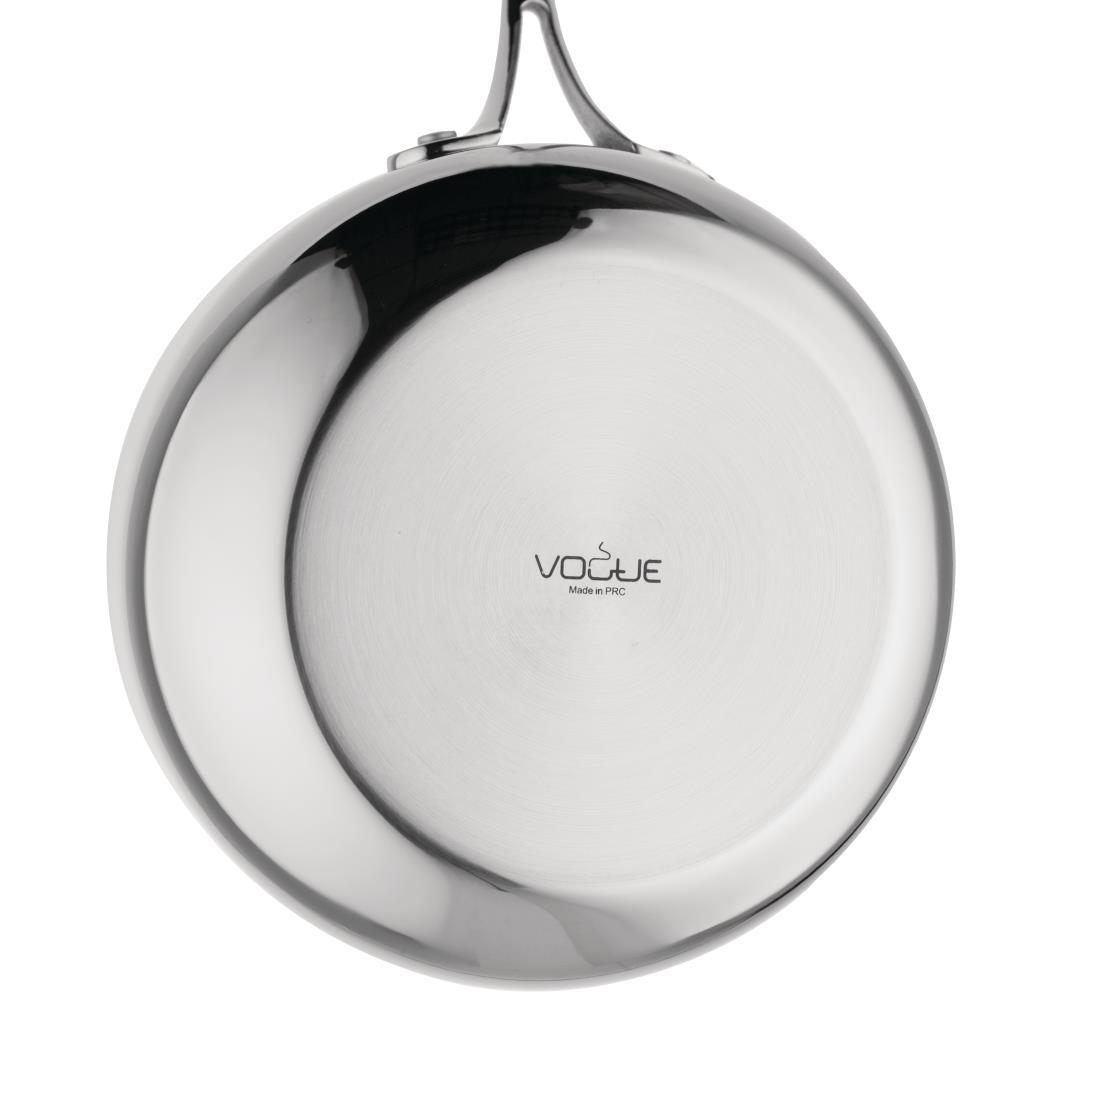 Vogue Tri Wall Flared Saute Pan 200mm - Y240  - 2